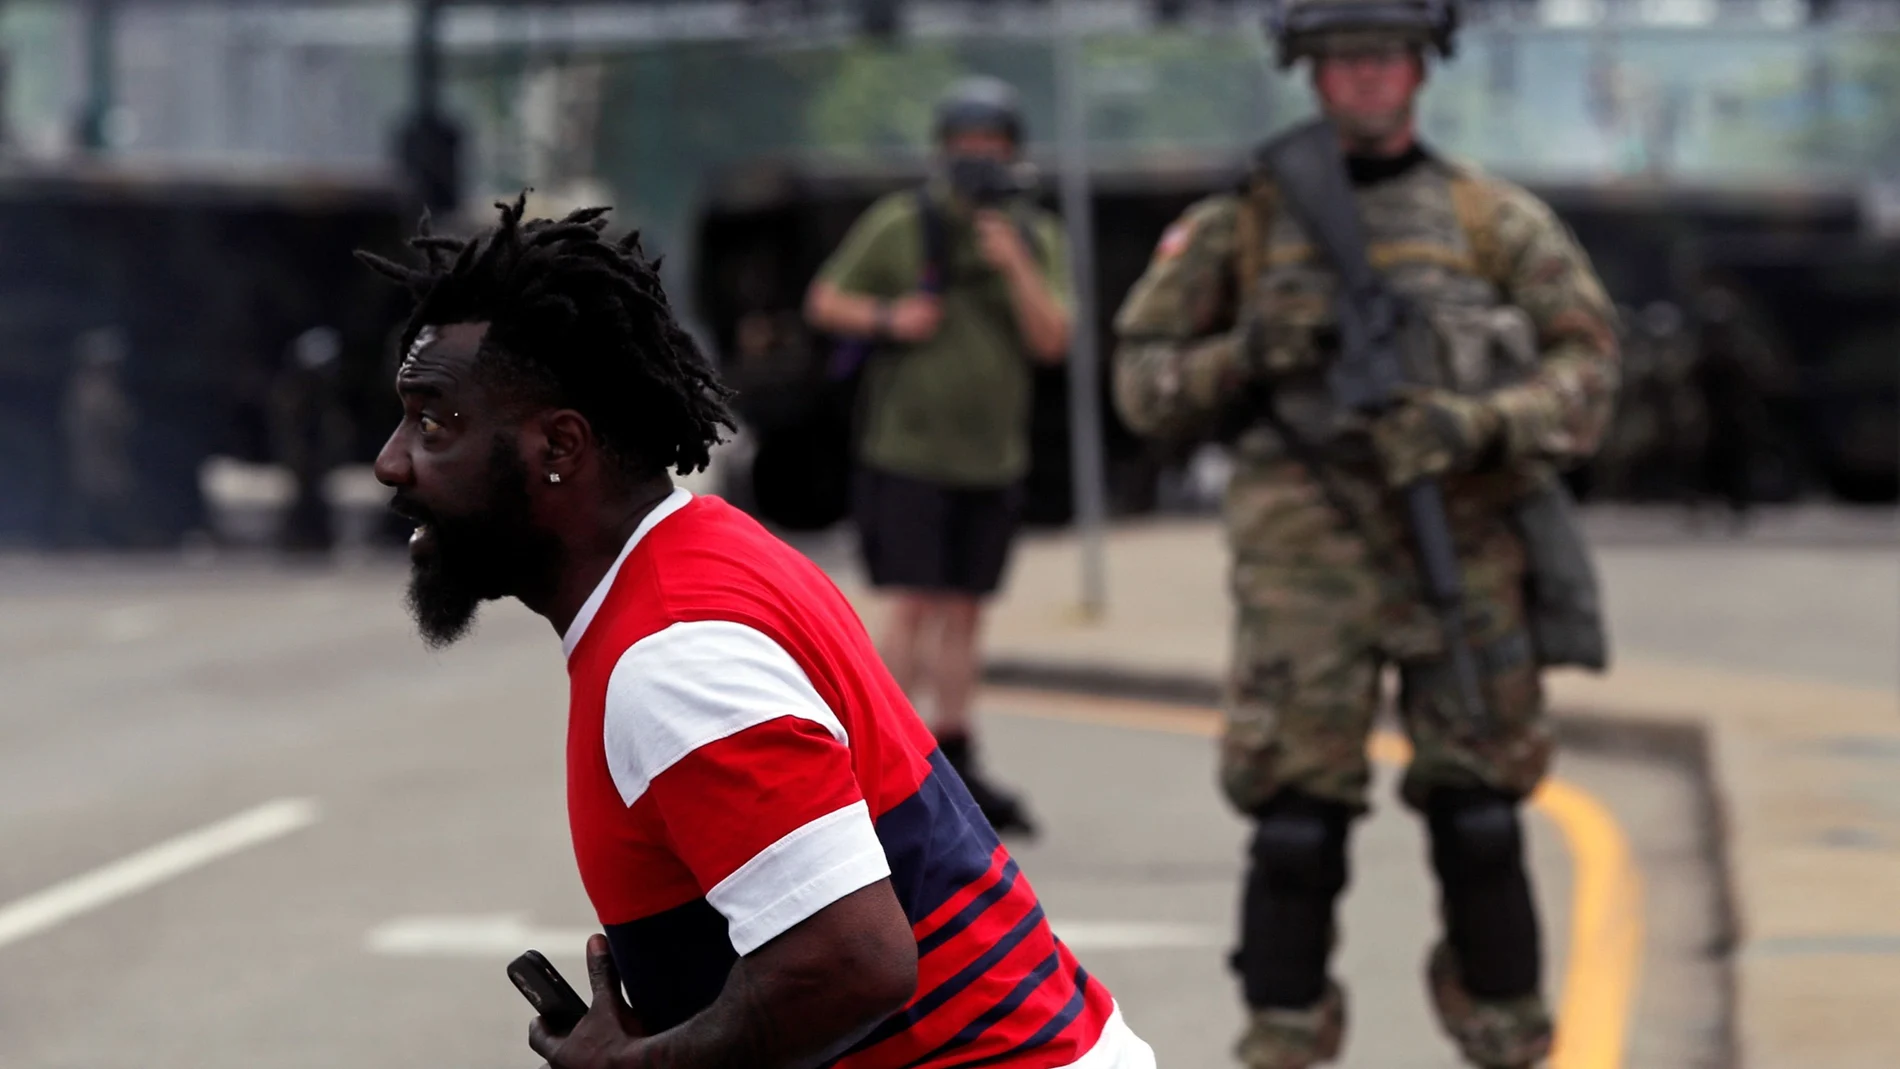 Man reacts as he confronts National Guard members guarding the area in the aftermath of a protest, in Minneapolis